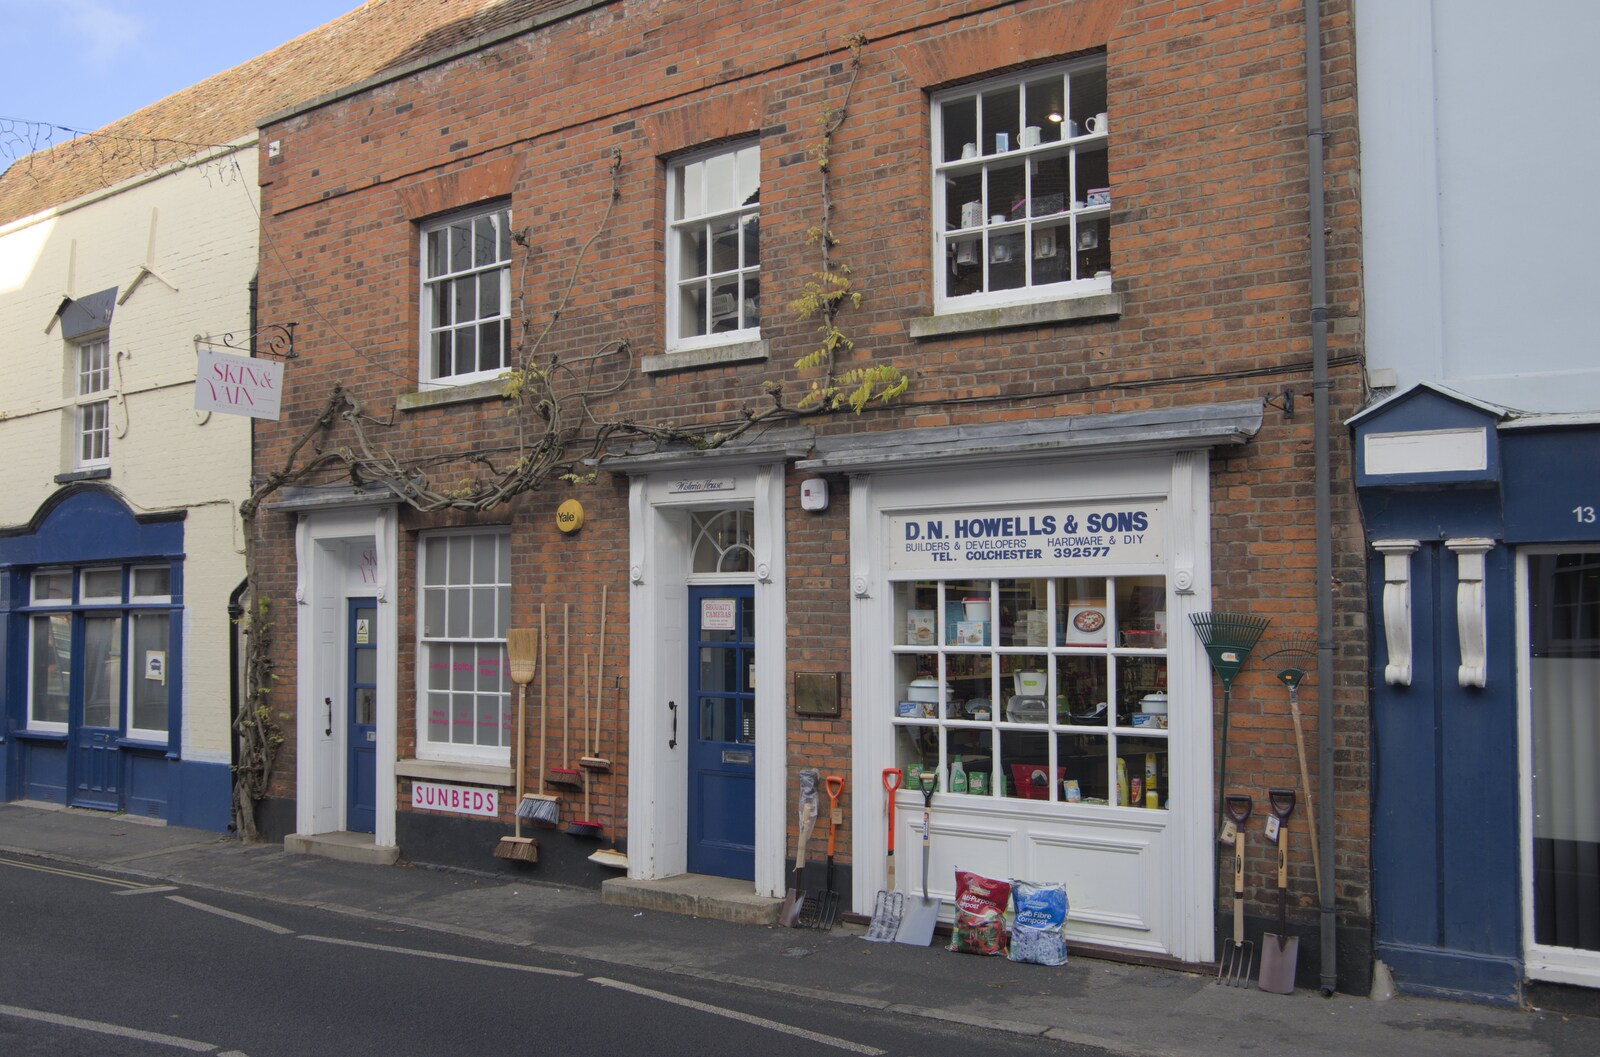 A nice little traditional hardware shop from A Postcard from Manningtree, Essex - 9th January 2024